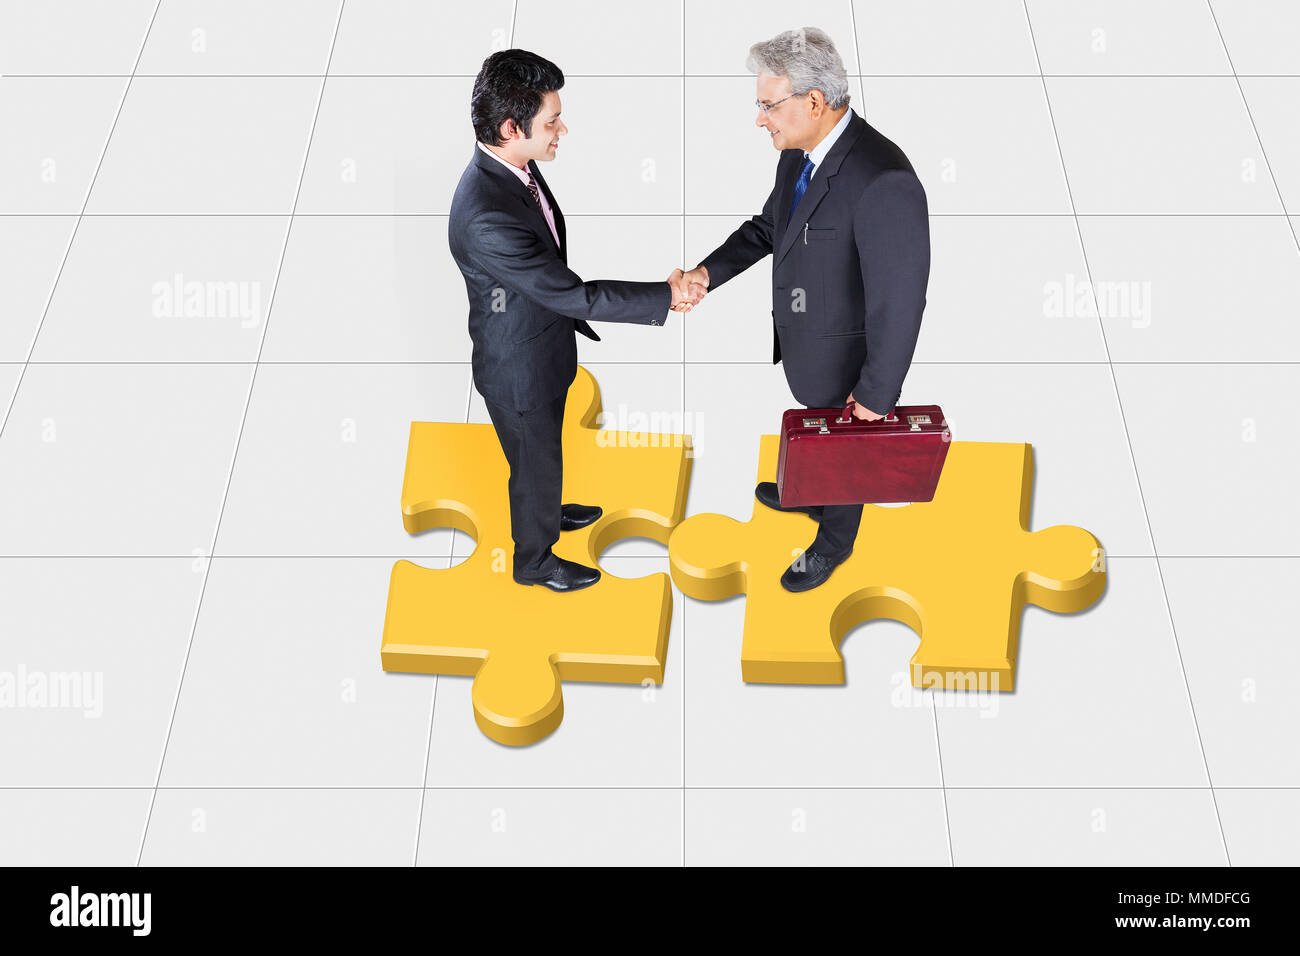 Two Bussiness-People partnership meeting. Successful businessmen handshaking after good deal Jigsaw Puzzle Stock Photo